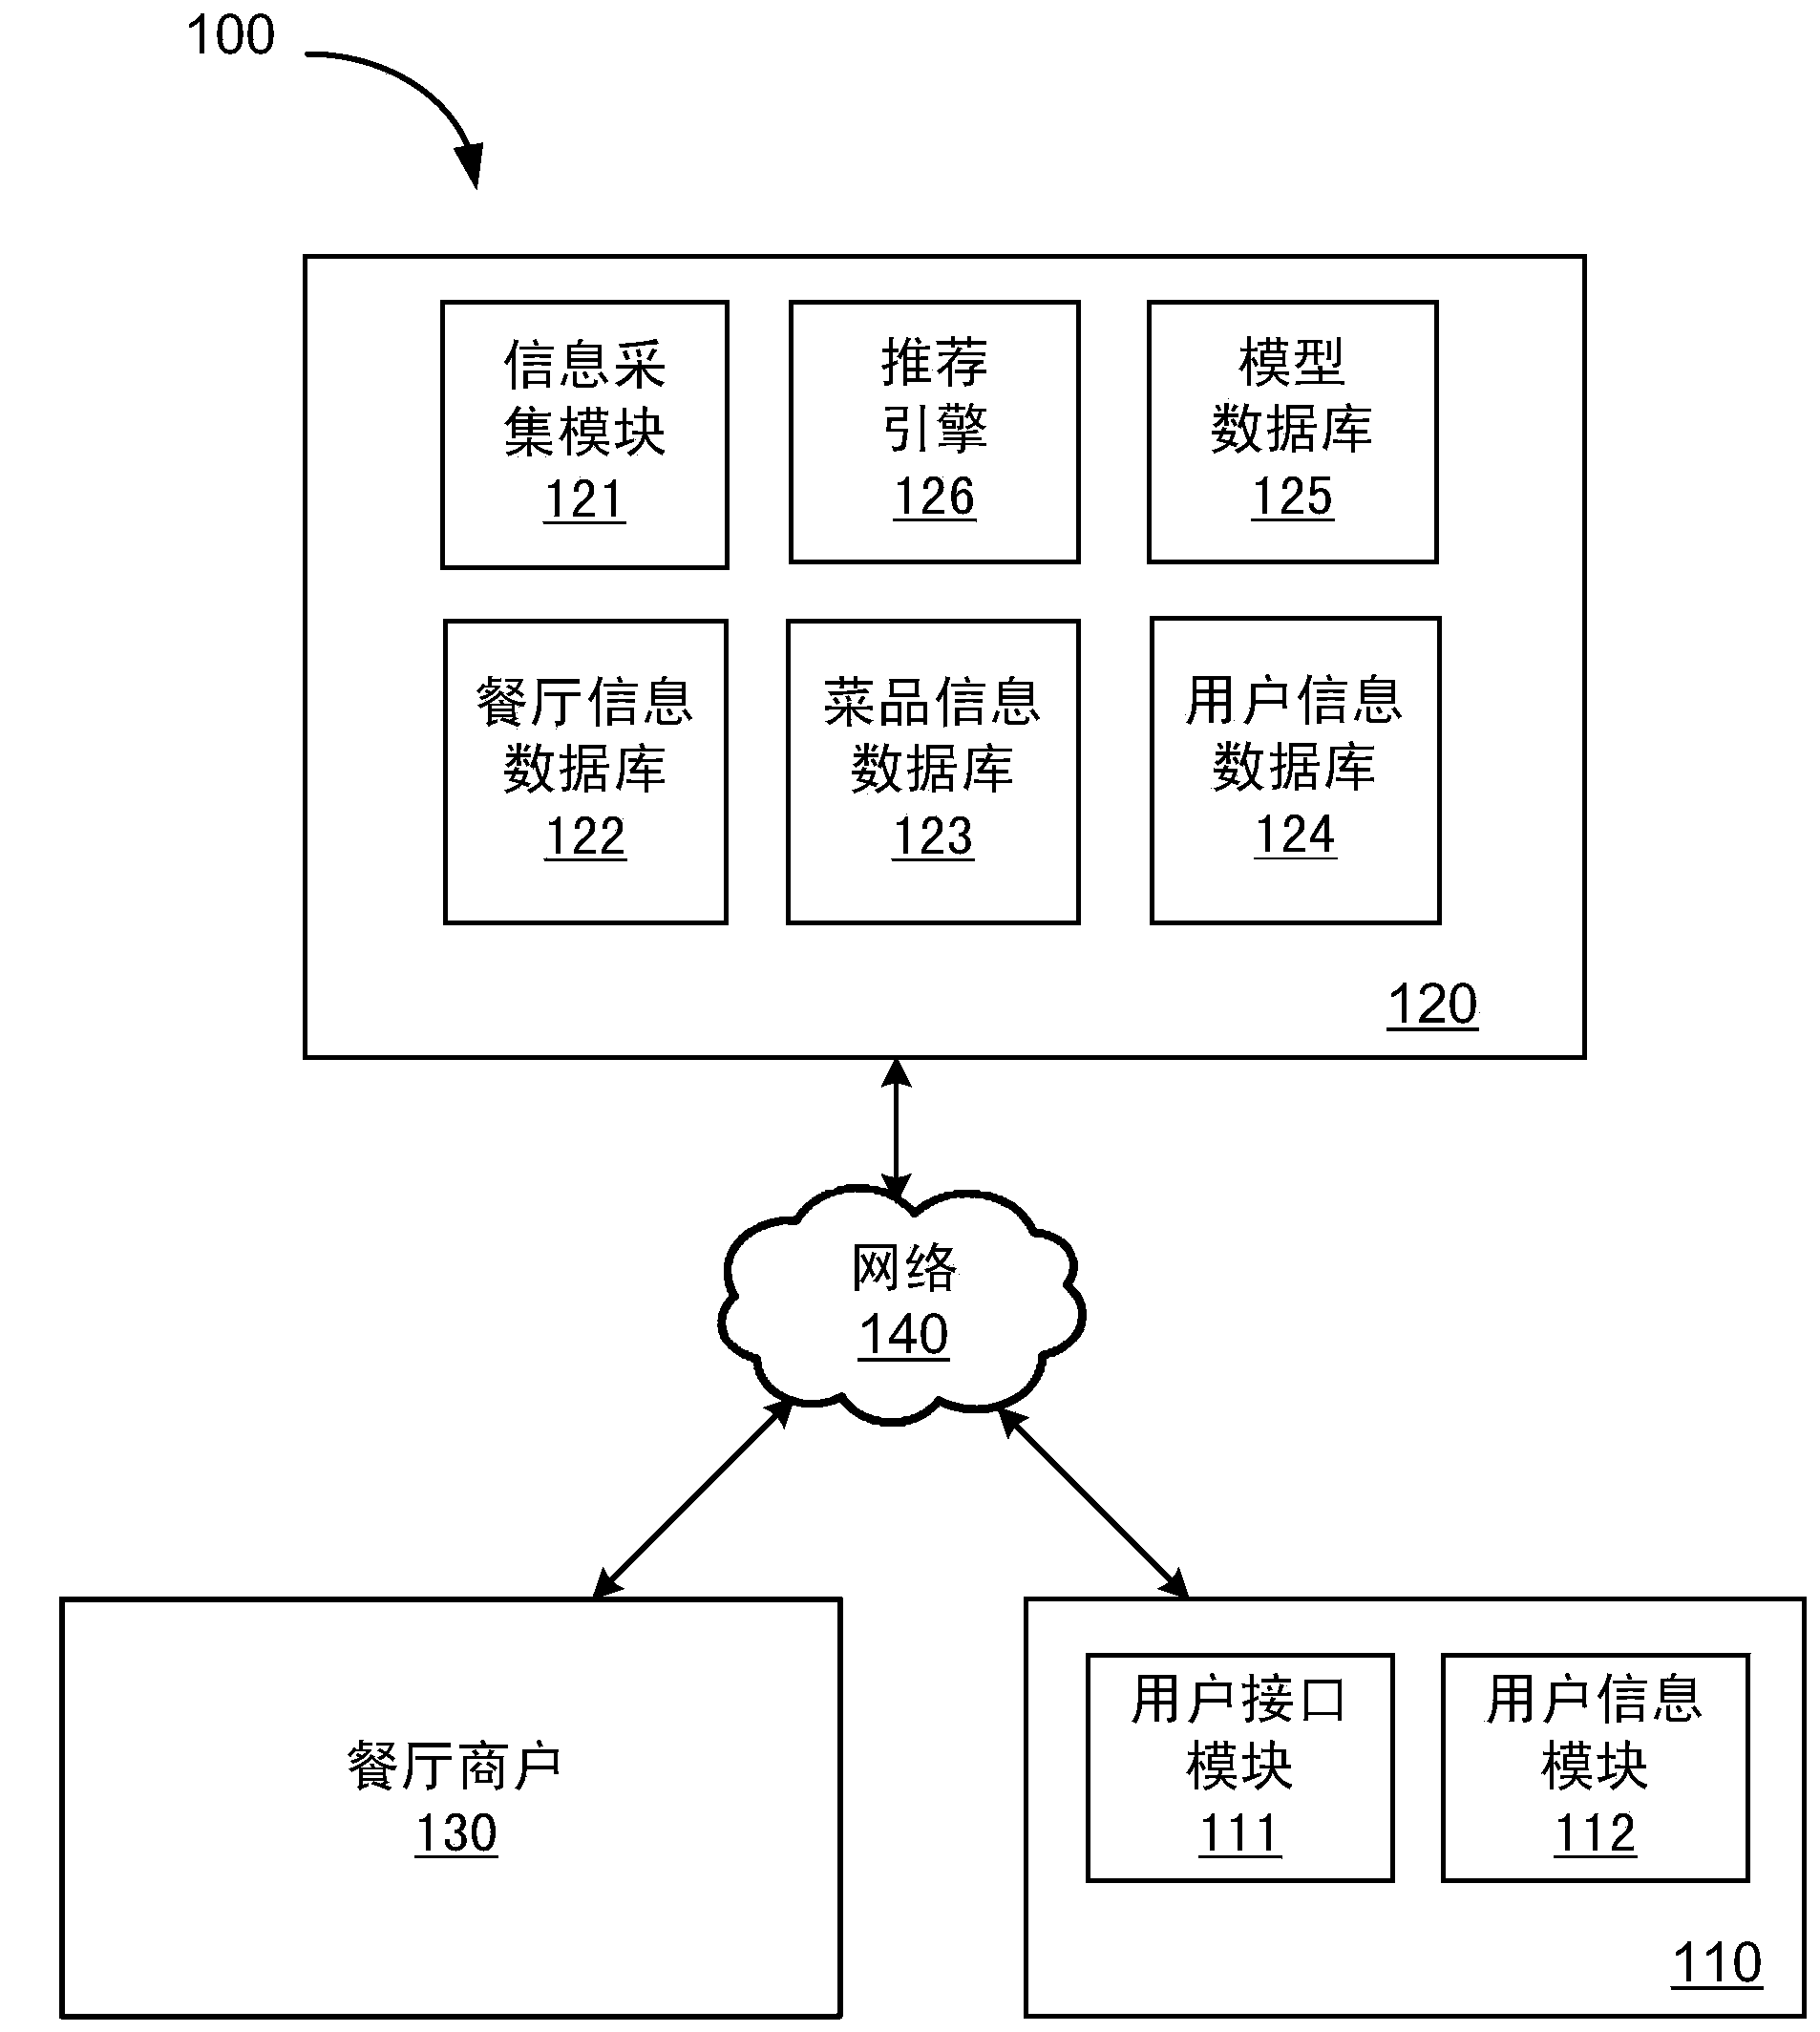 Dish recommendation system based on data mining and cloud computing service